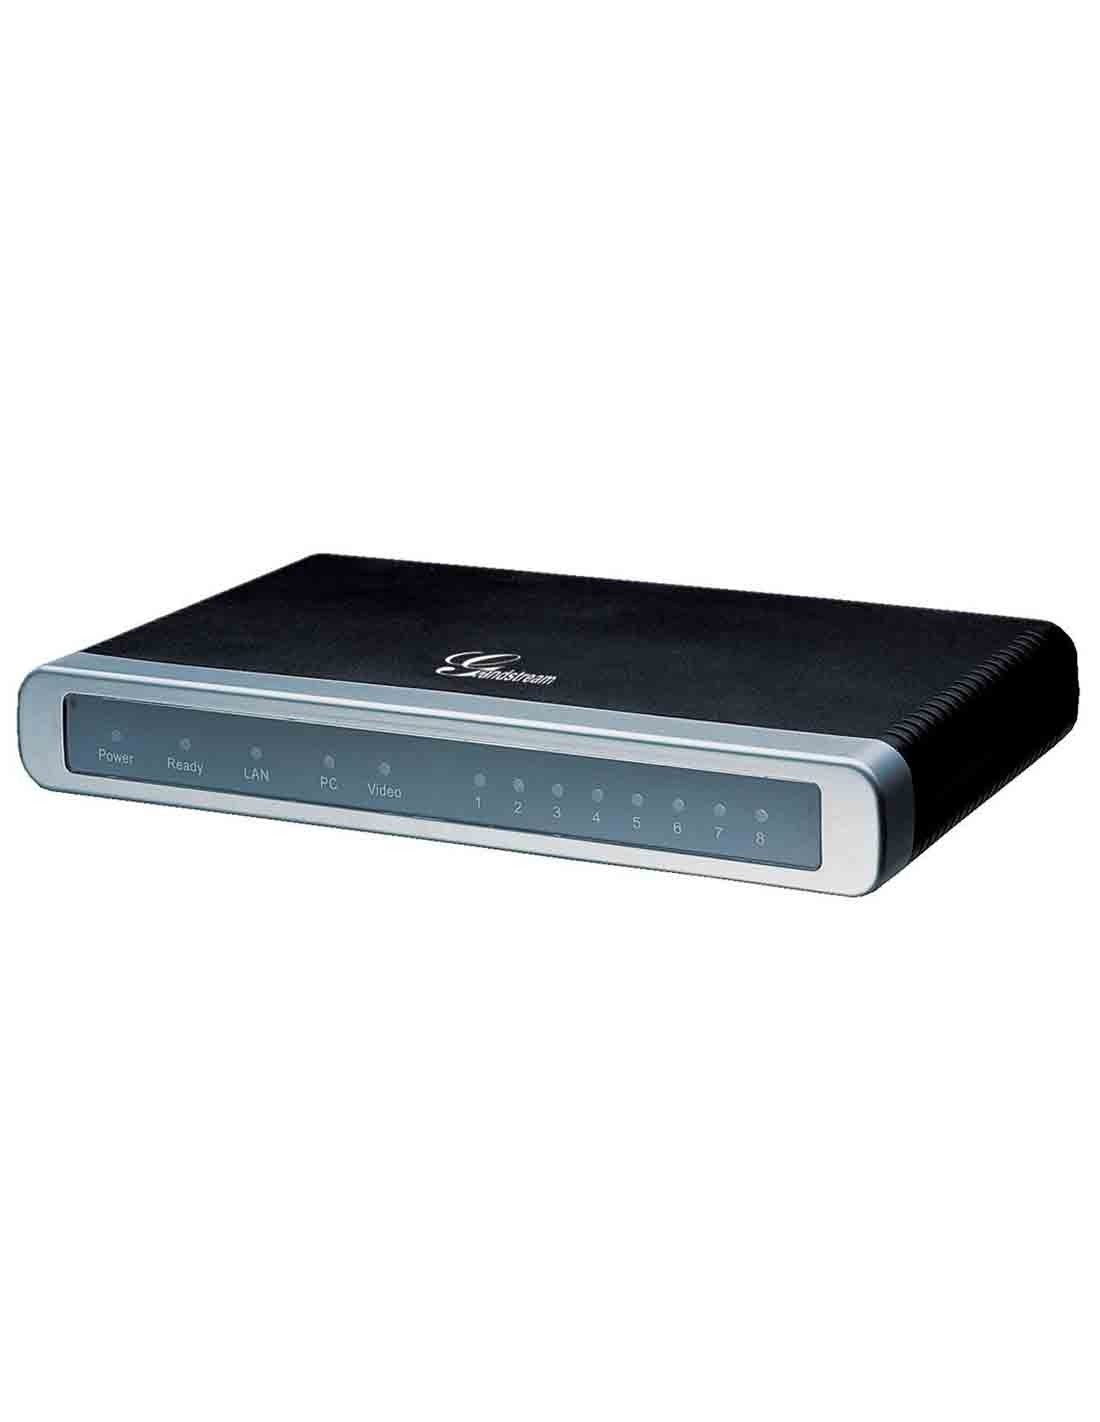 Grandstream GXW4008 8 Port FXS Gateway at a cheap price and free delivery in Dubai